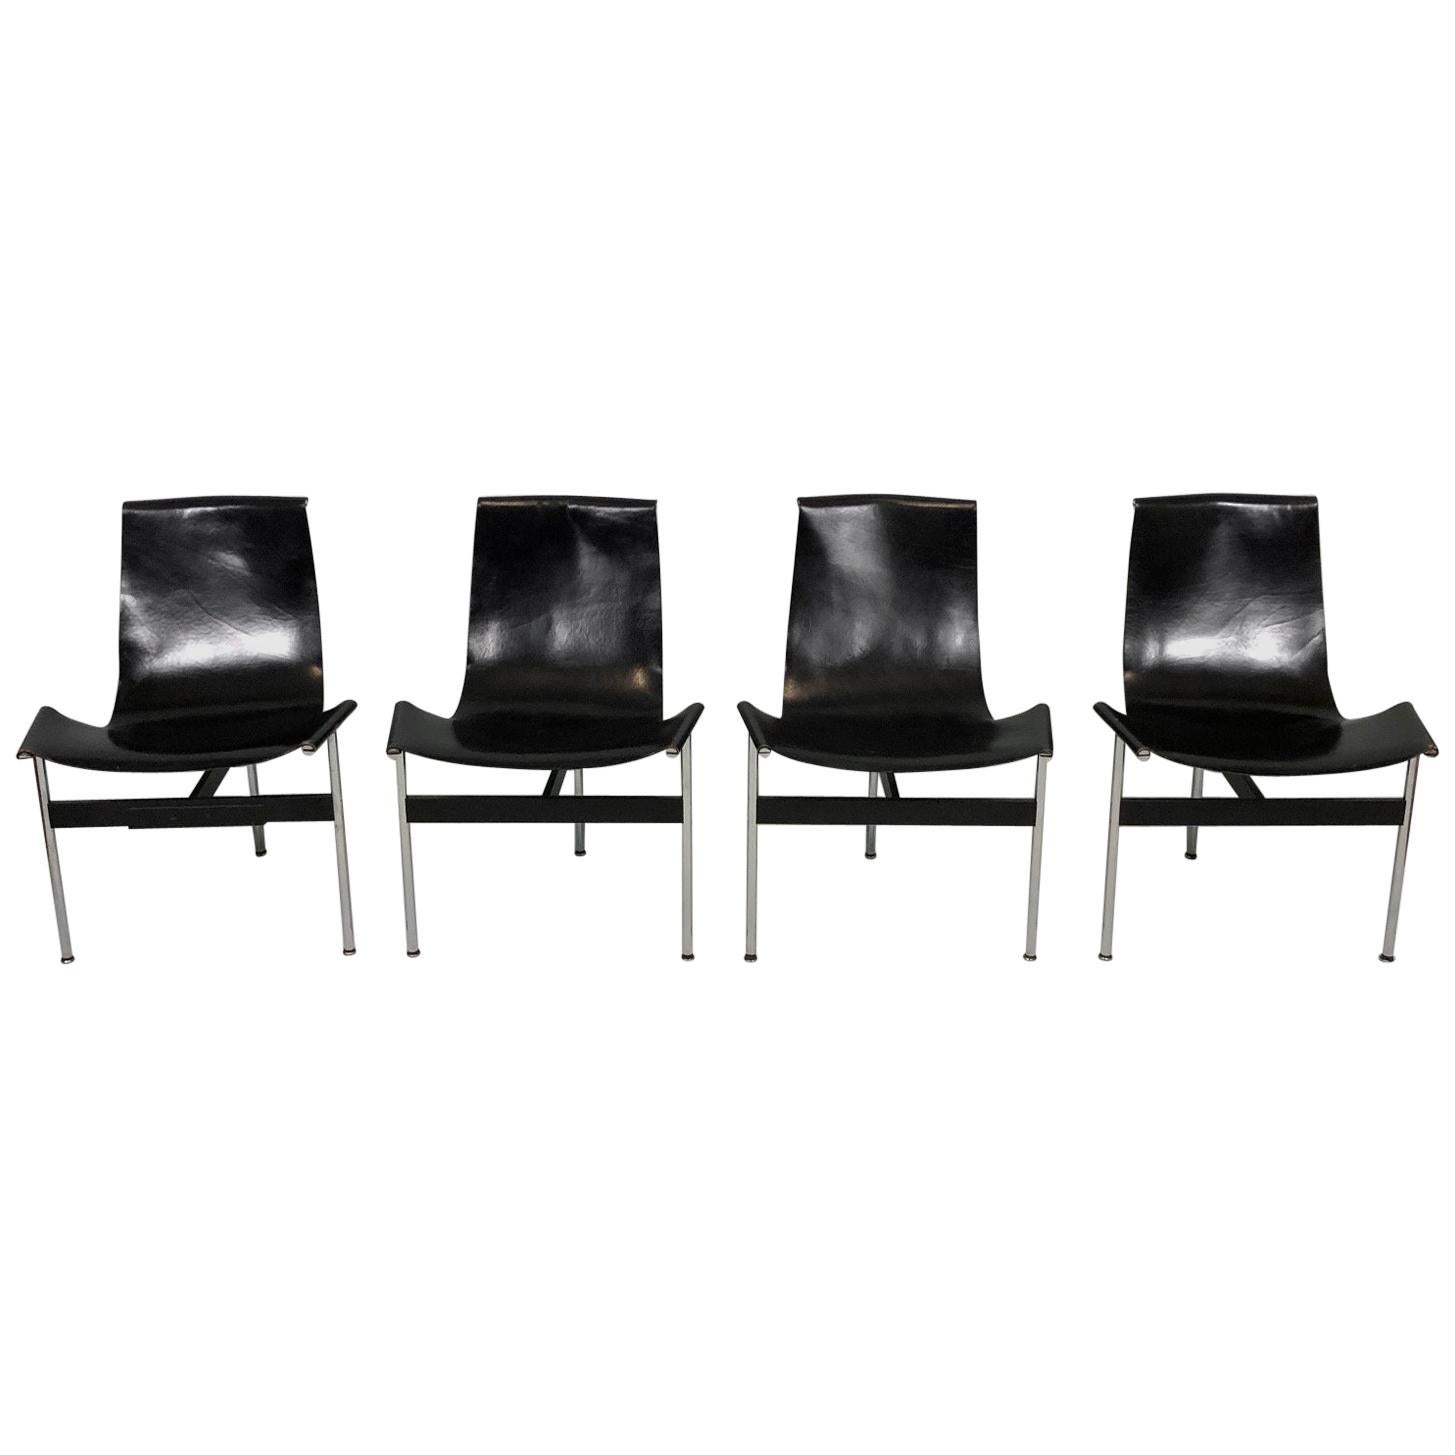 Set of Four T-Chairs by W. Katavolos, Douglas Kelly & Ross Littel, Made by ICF For Sale